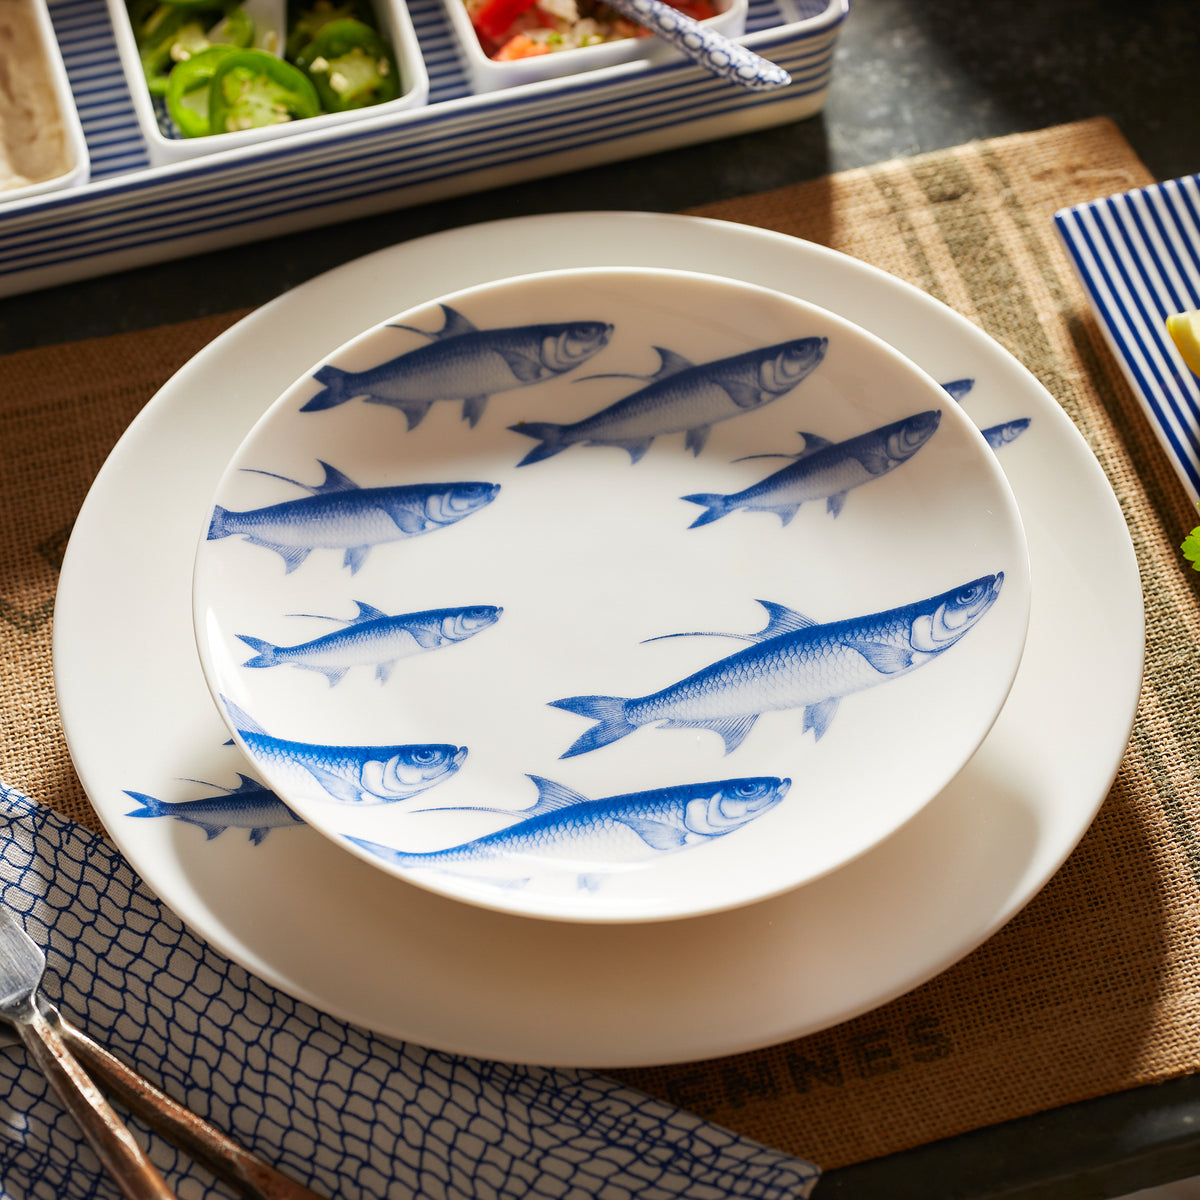 A blue Caskata Artisanal Home porcelain School of Fish Coupe Salad Plate adorned with a school of fish.